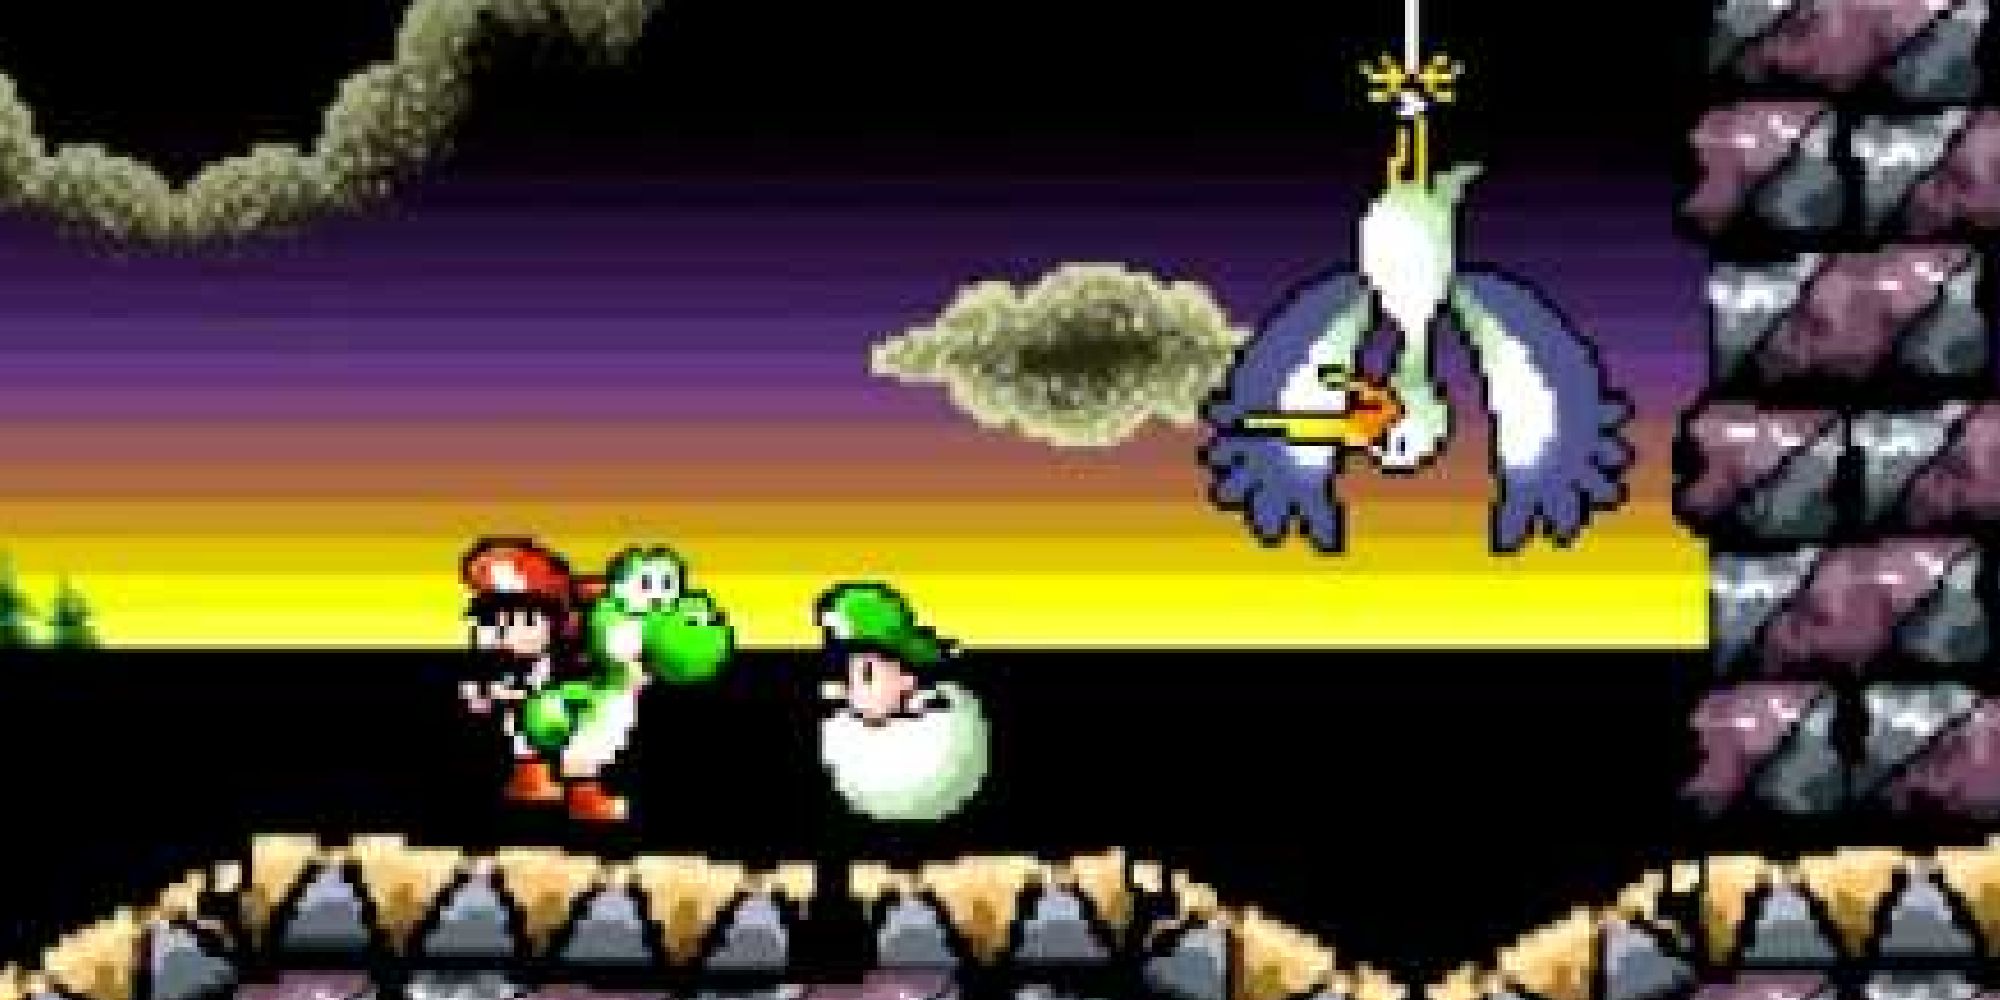 Yoshi and Baby Mario approaching Baby Luigi and a tied up stork